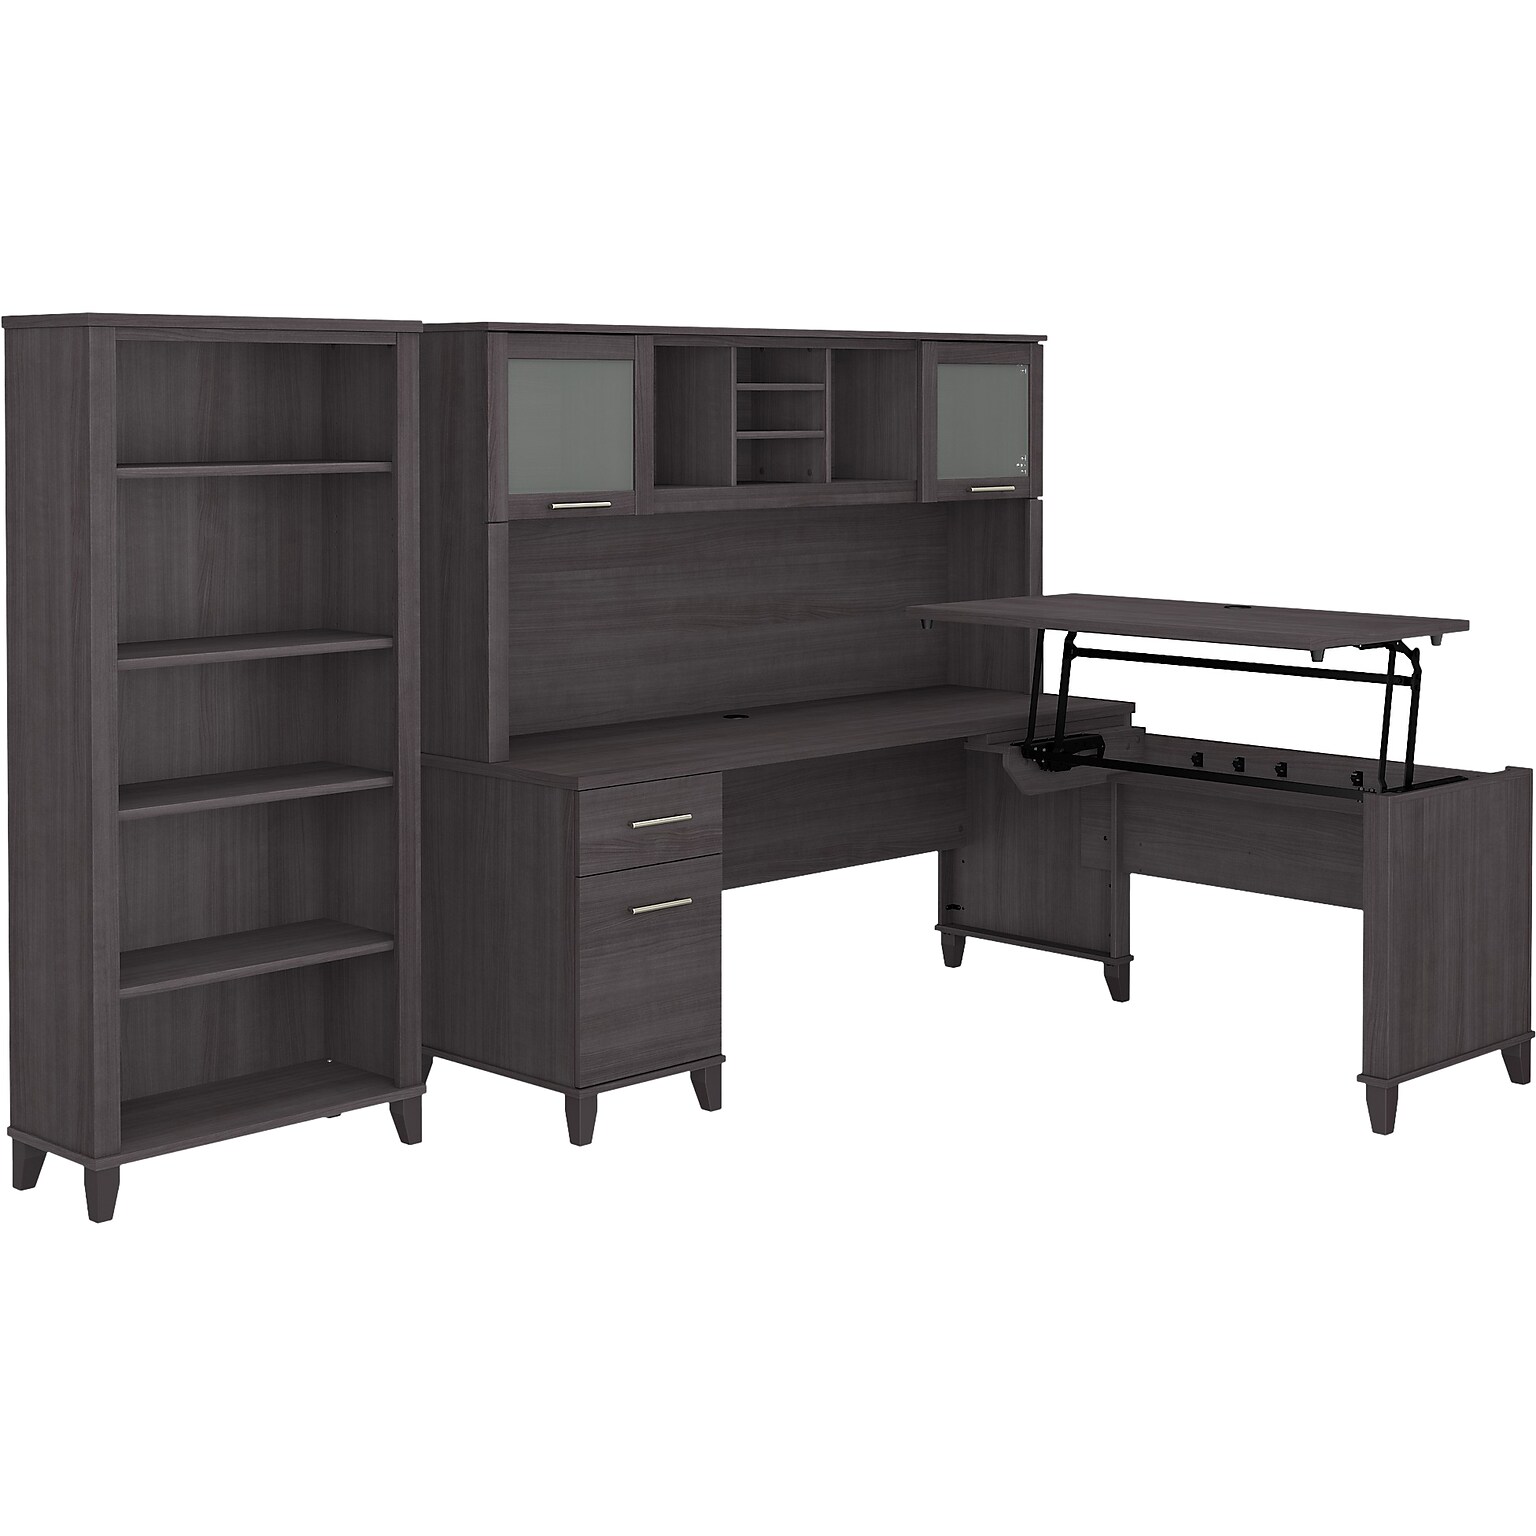 Bush Furniture Somerset 72W 3 Position Sit to Stand L Shaped Desk with Hutch and Bookcase, Storm Gray (SET017SG)